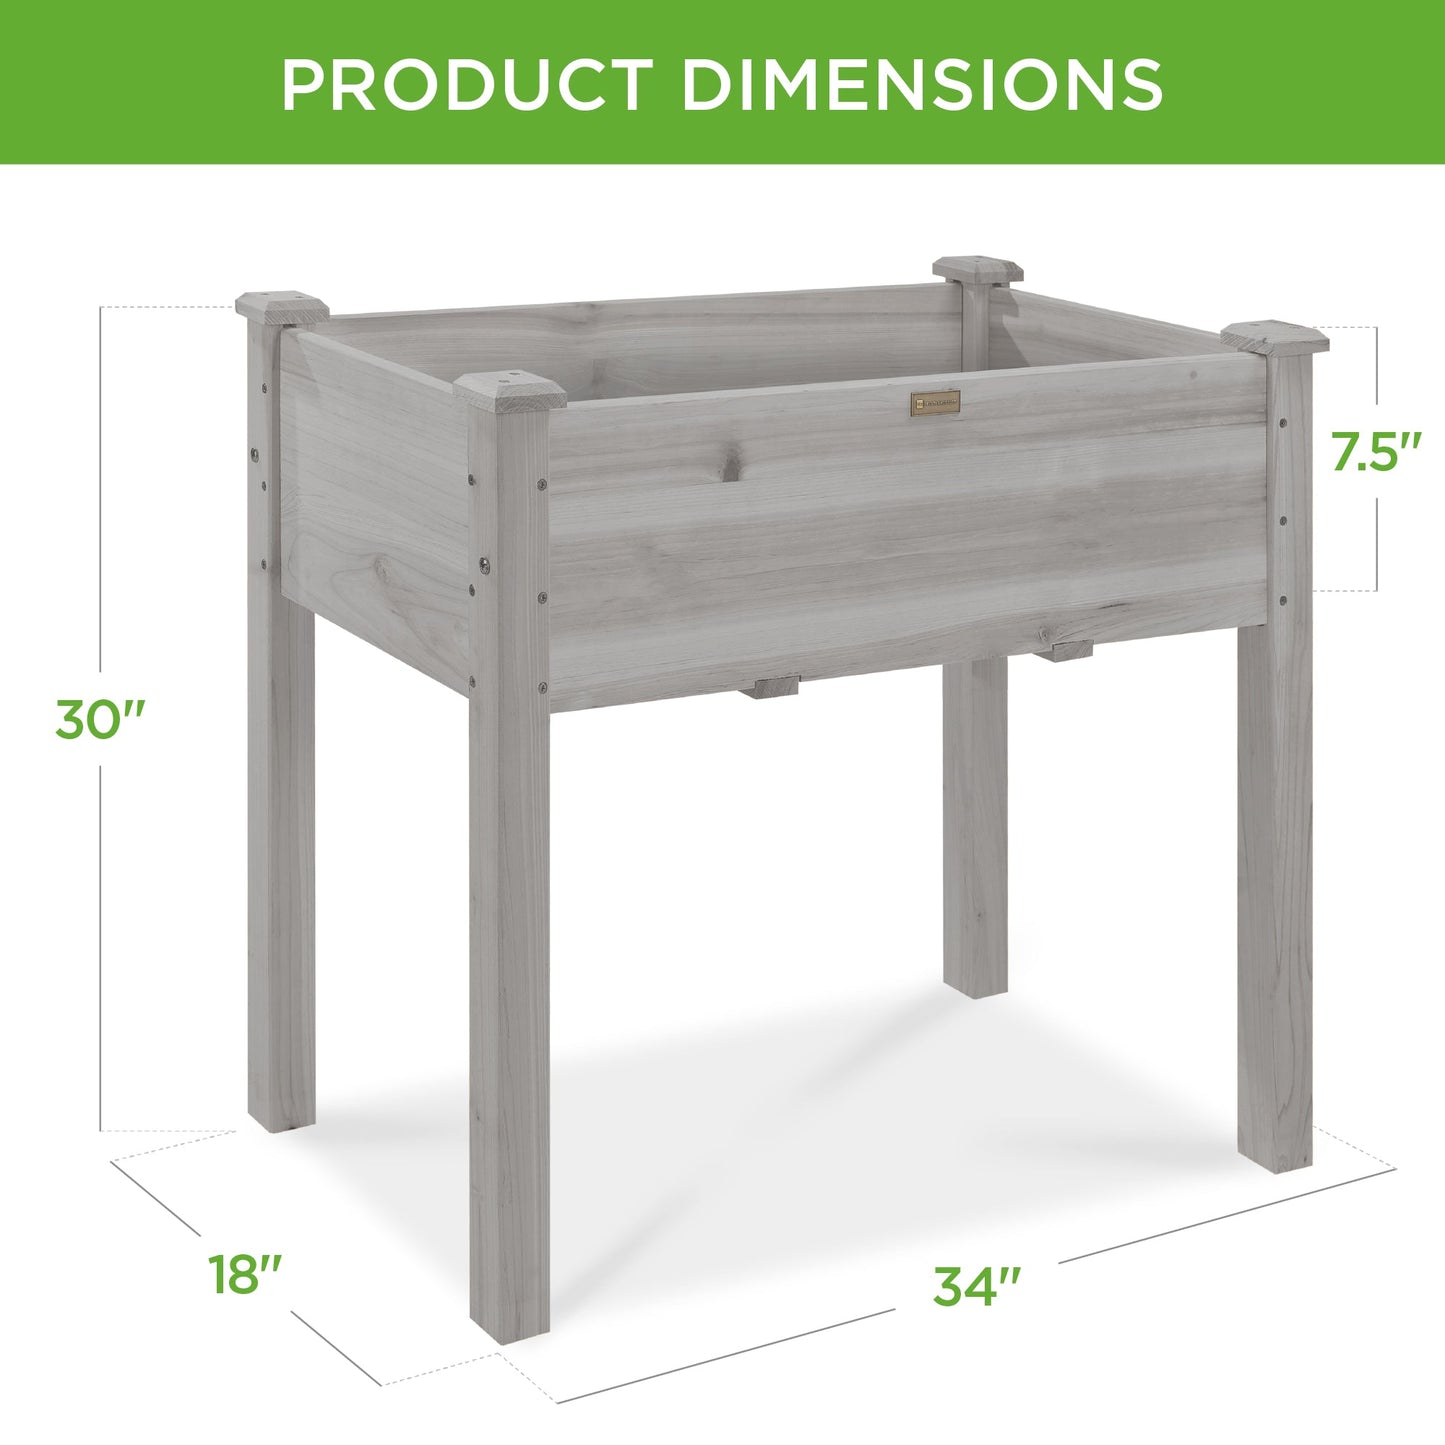 Raised Garden Bed, Elevated Wood Planter Box Stand w/ Bed Liner - 34x18x30in